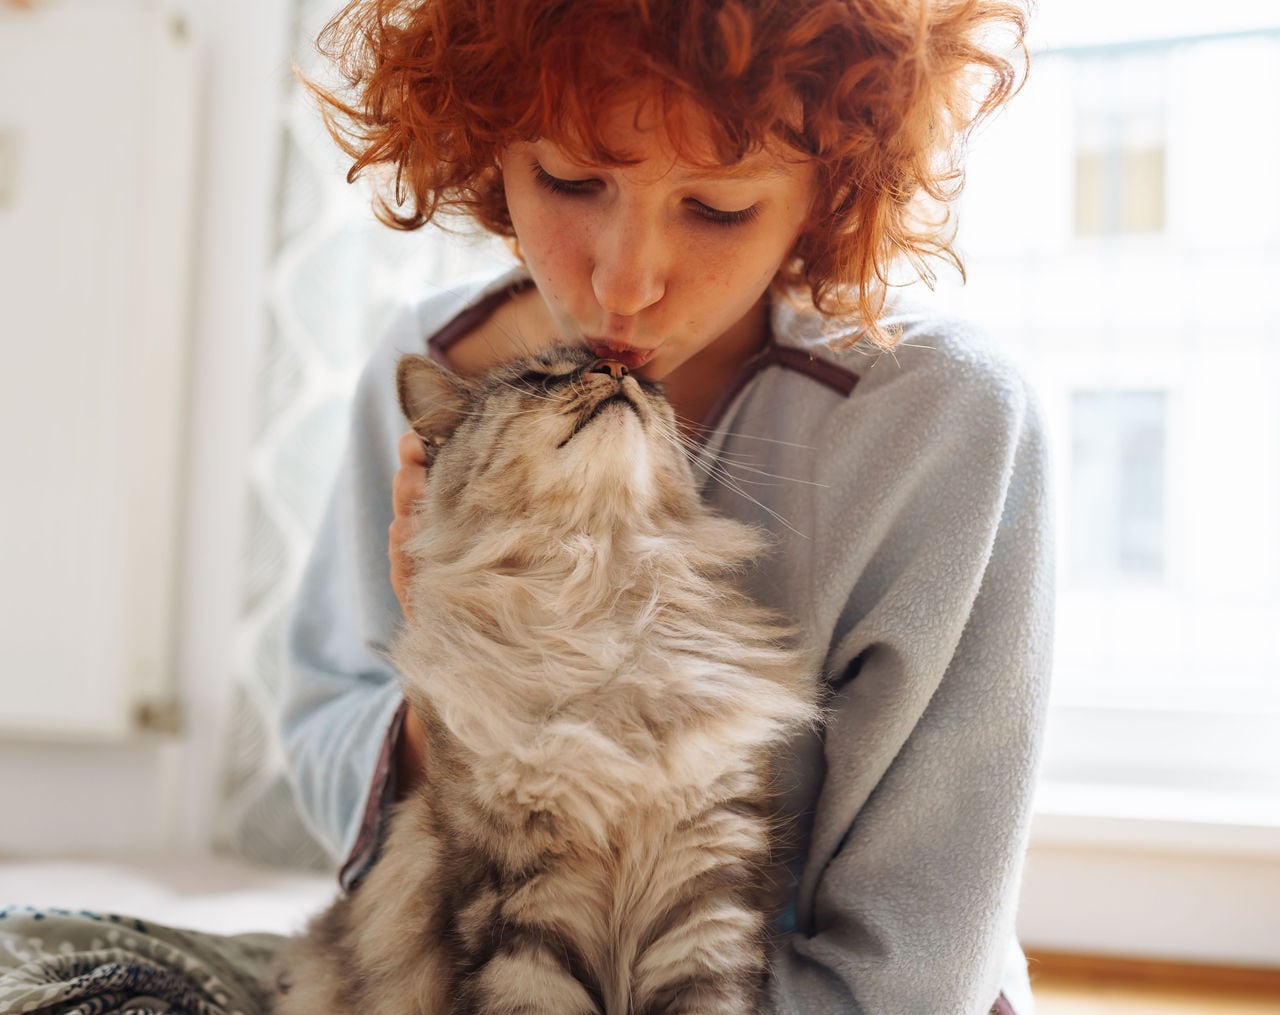 Funny red-haired girl teenager hugs kisses a purring Maine Coon cat, sitting on floor near window at home